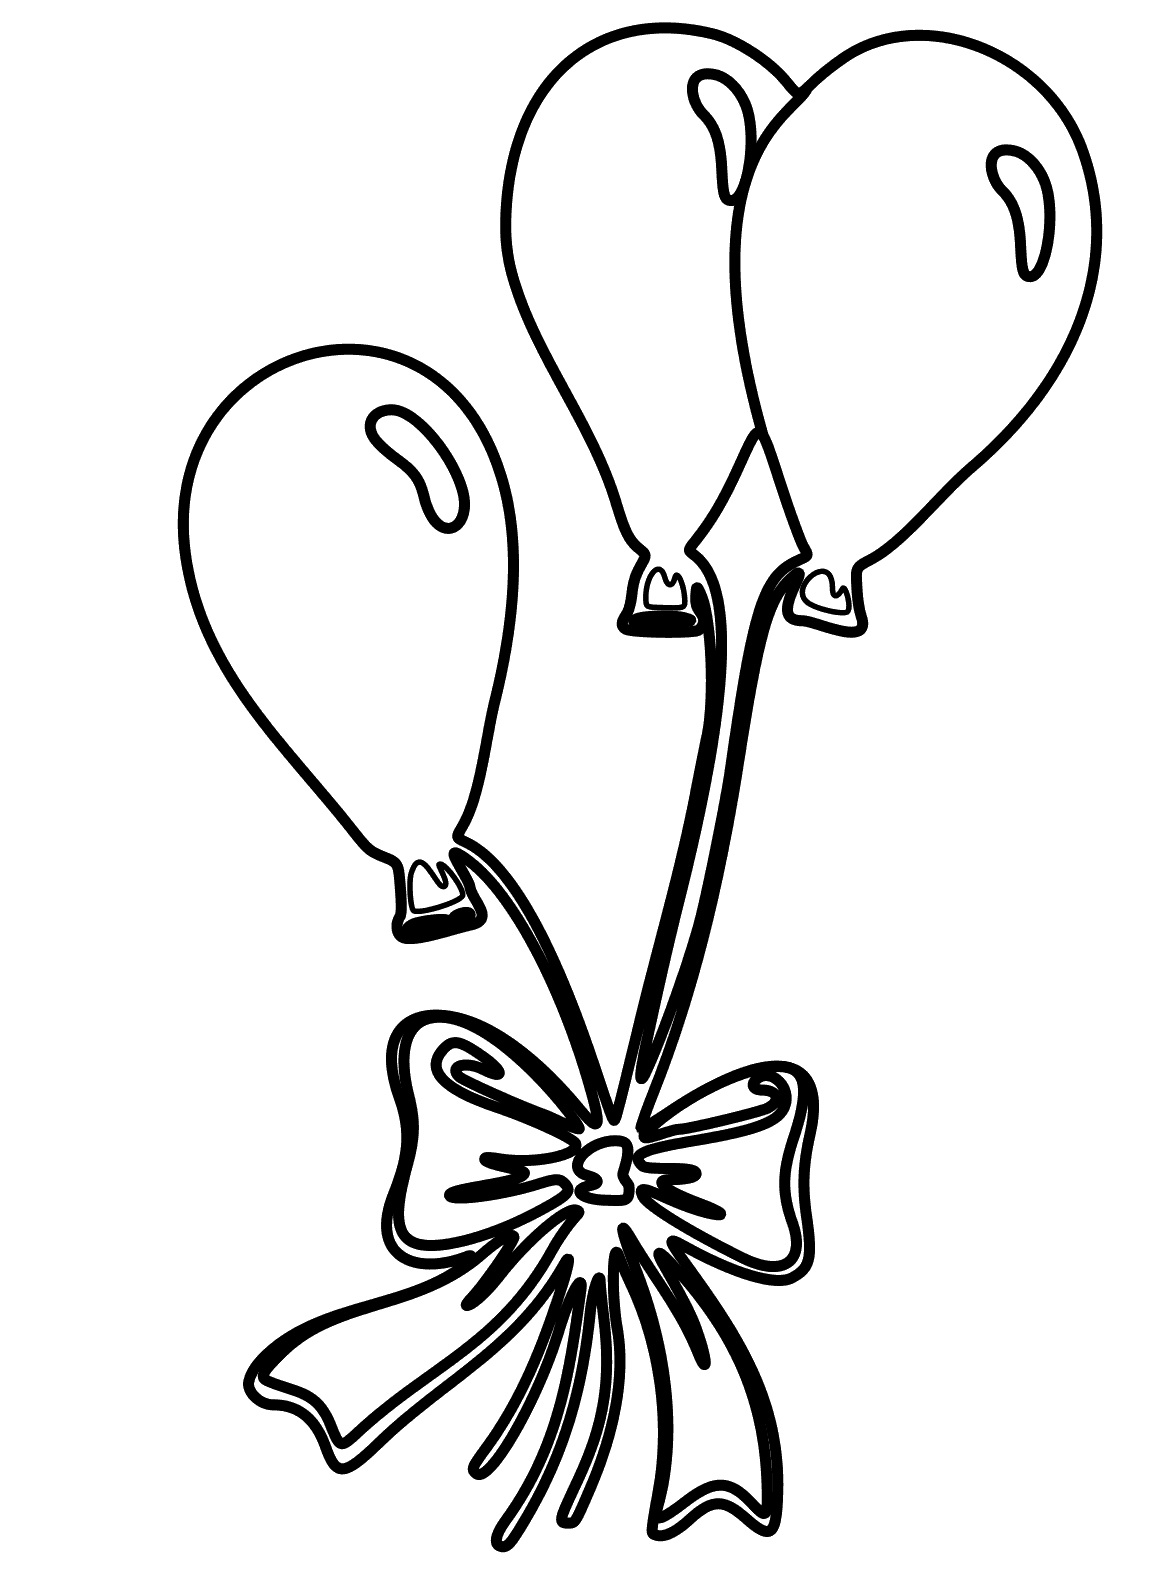 Gift of Balloons Coloring Page